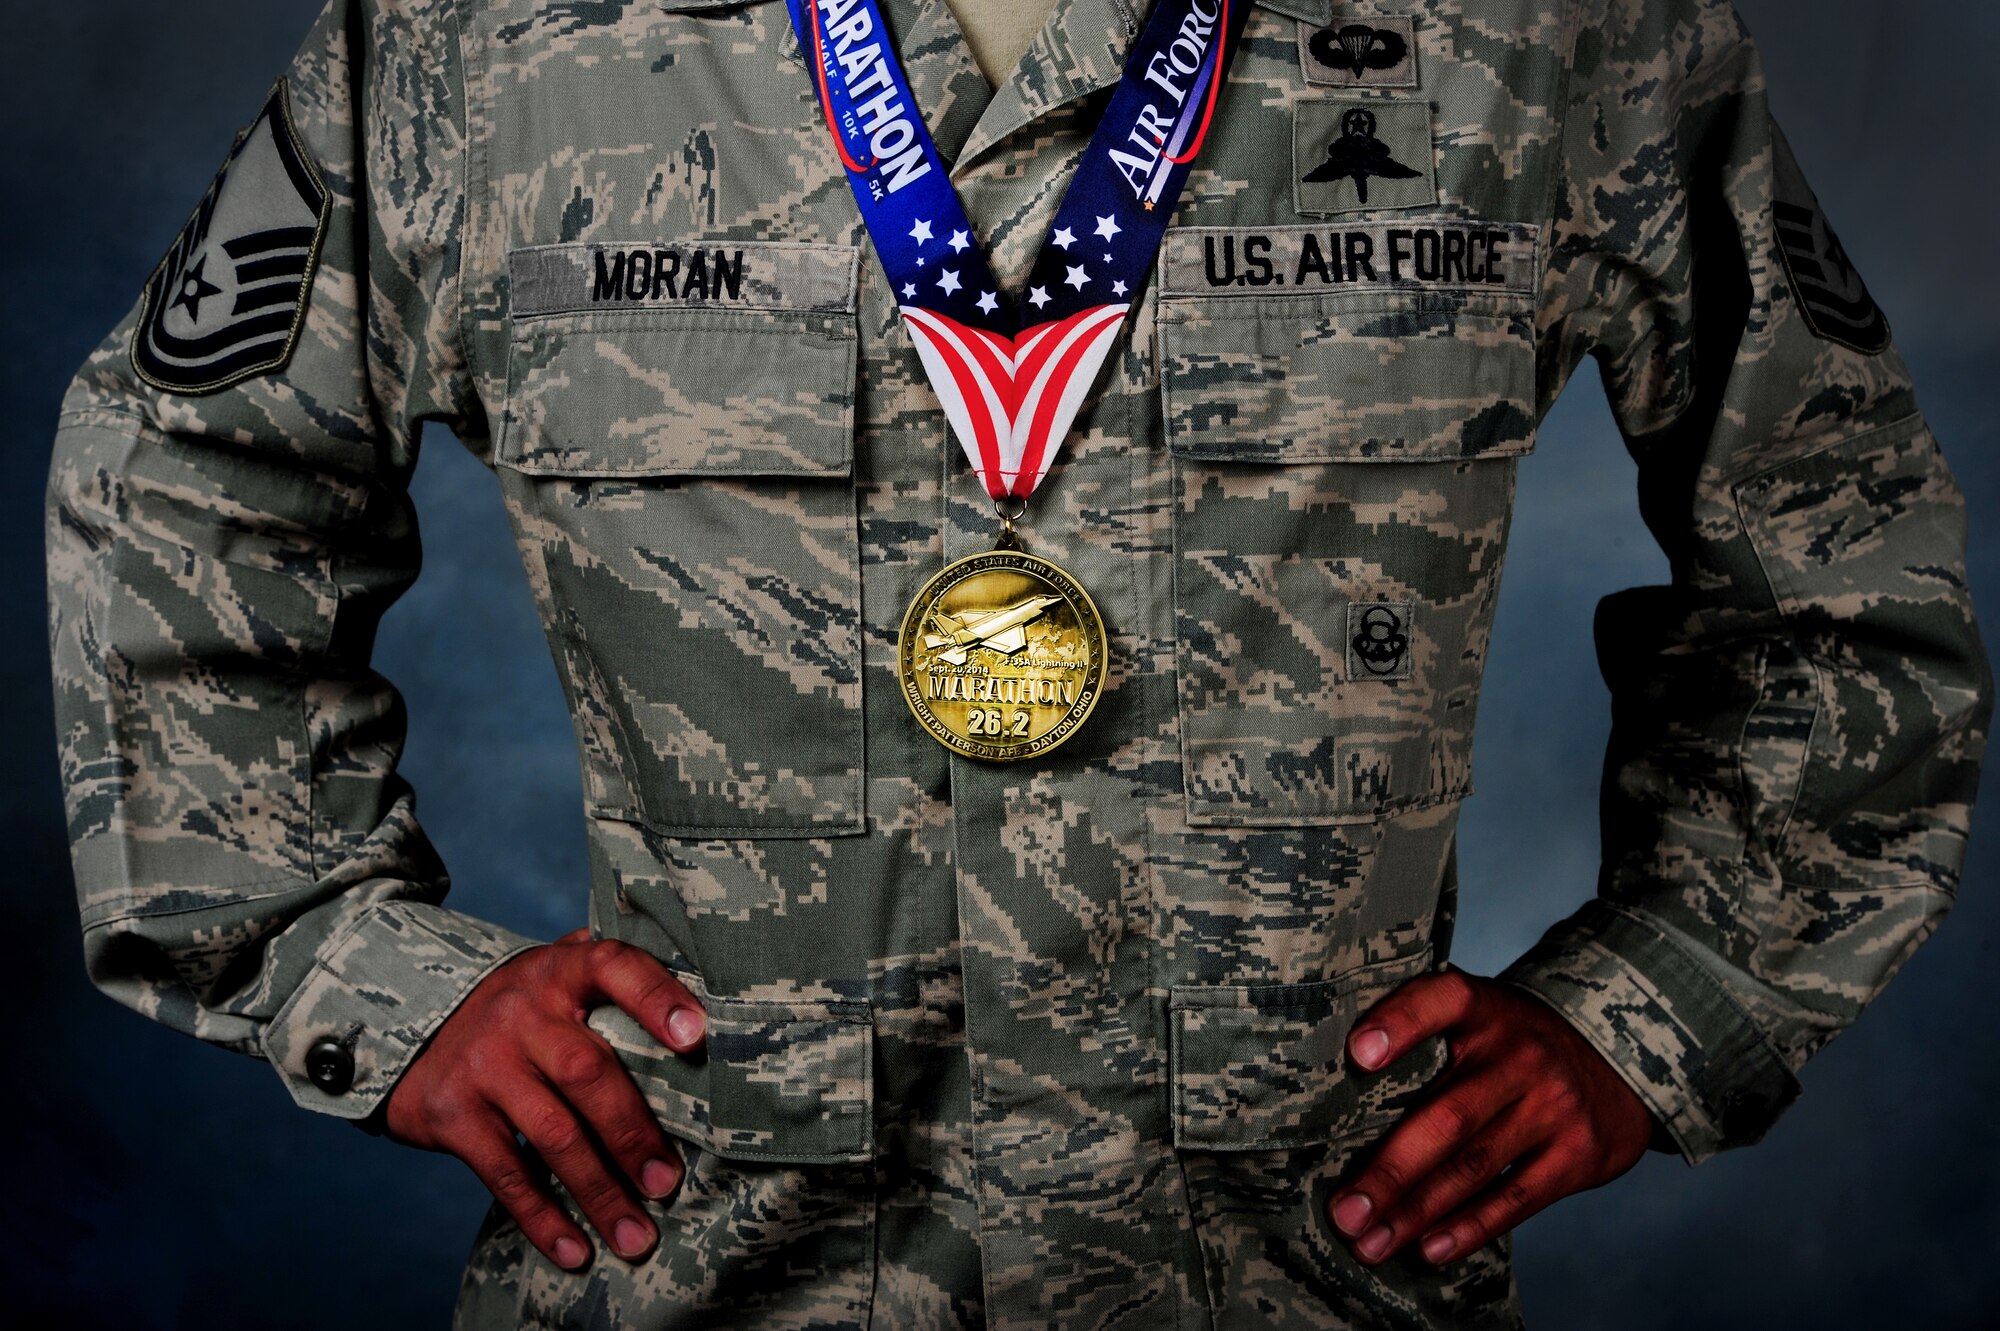 U.S. Air Force Master Sgt. Juanjose Moran, 26th Special Tactics Squadron flight chief, 24th Special Operations Wing, dons his AF Marathon medal.  Moran recently crossed the 2014 Air Force Marathon’s 26.2 mile finish line in 2:37 as the first active duty military winner and third overall finisher. (U.S. Air Force photo/Staff Sgt. Matthew Plew) 